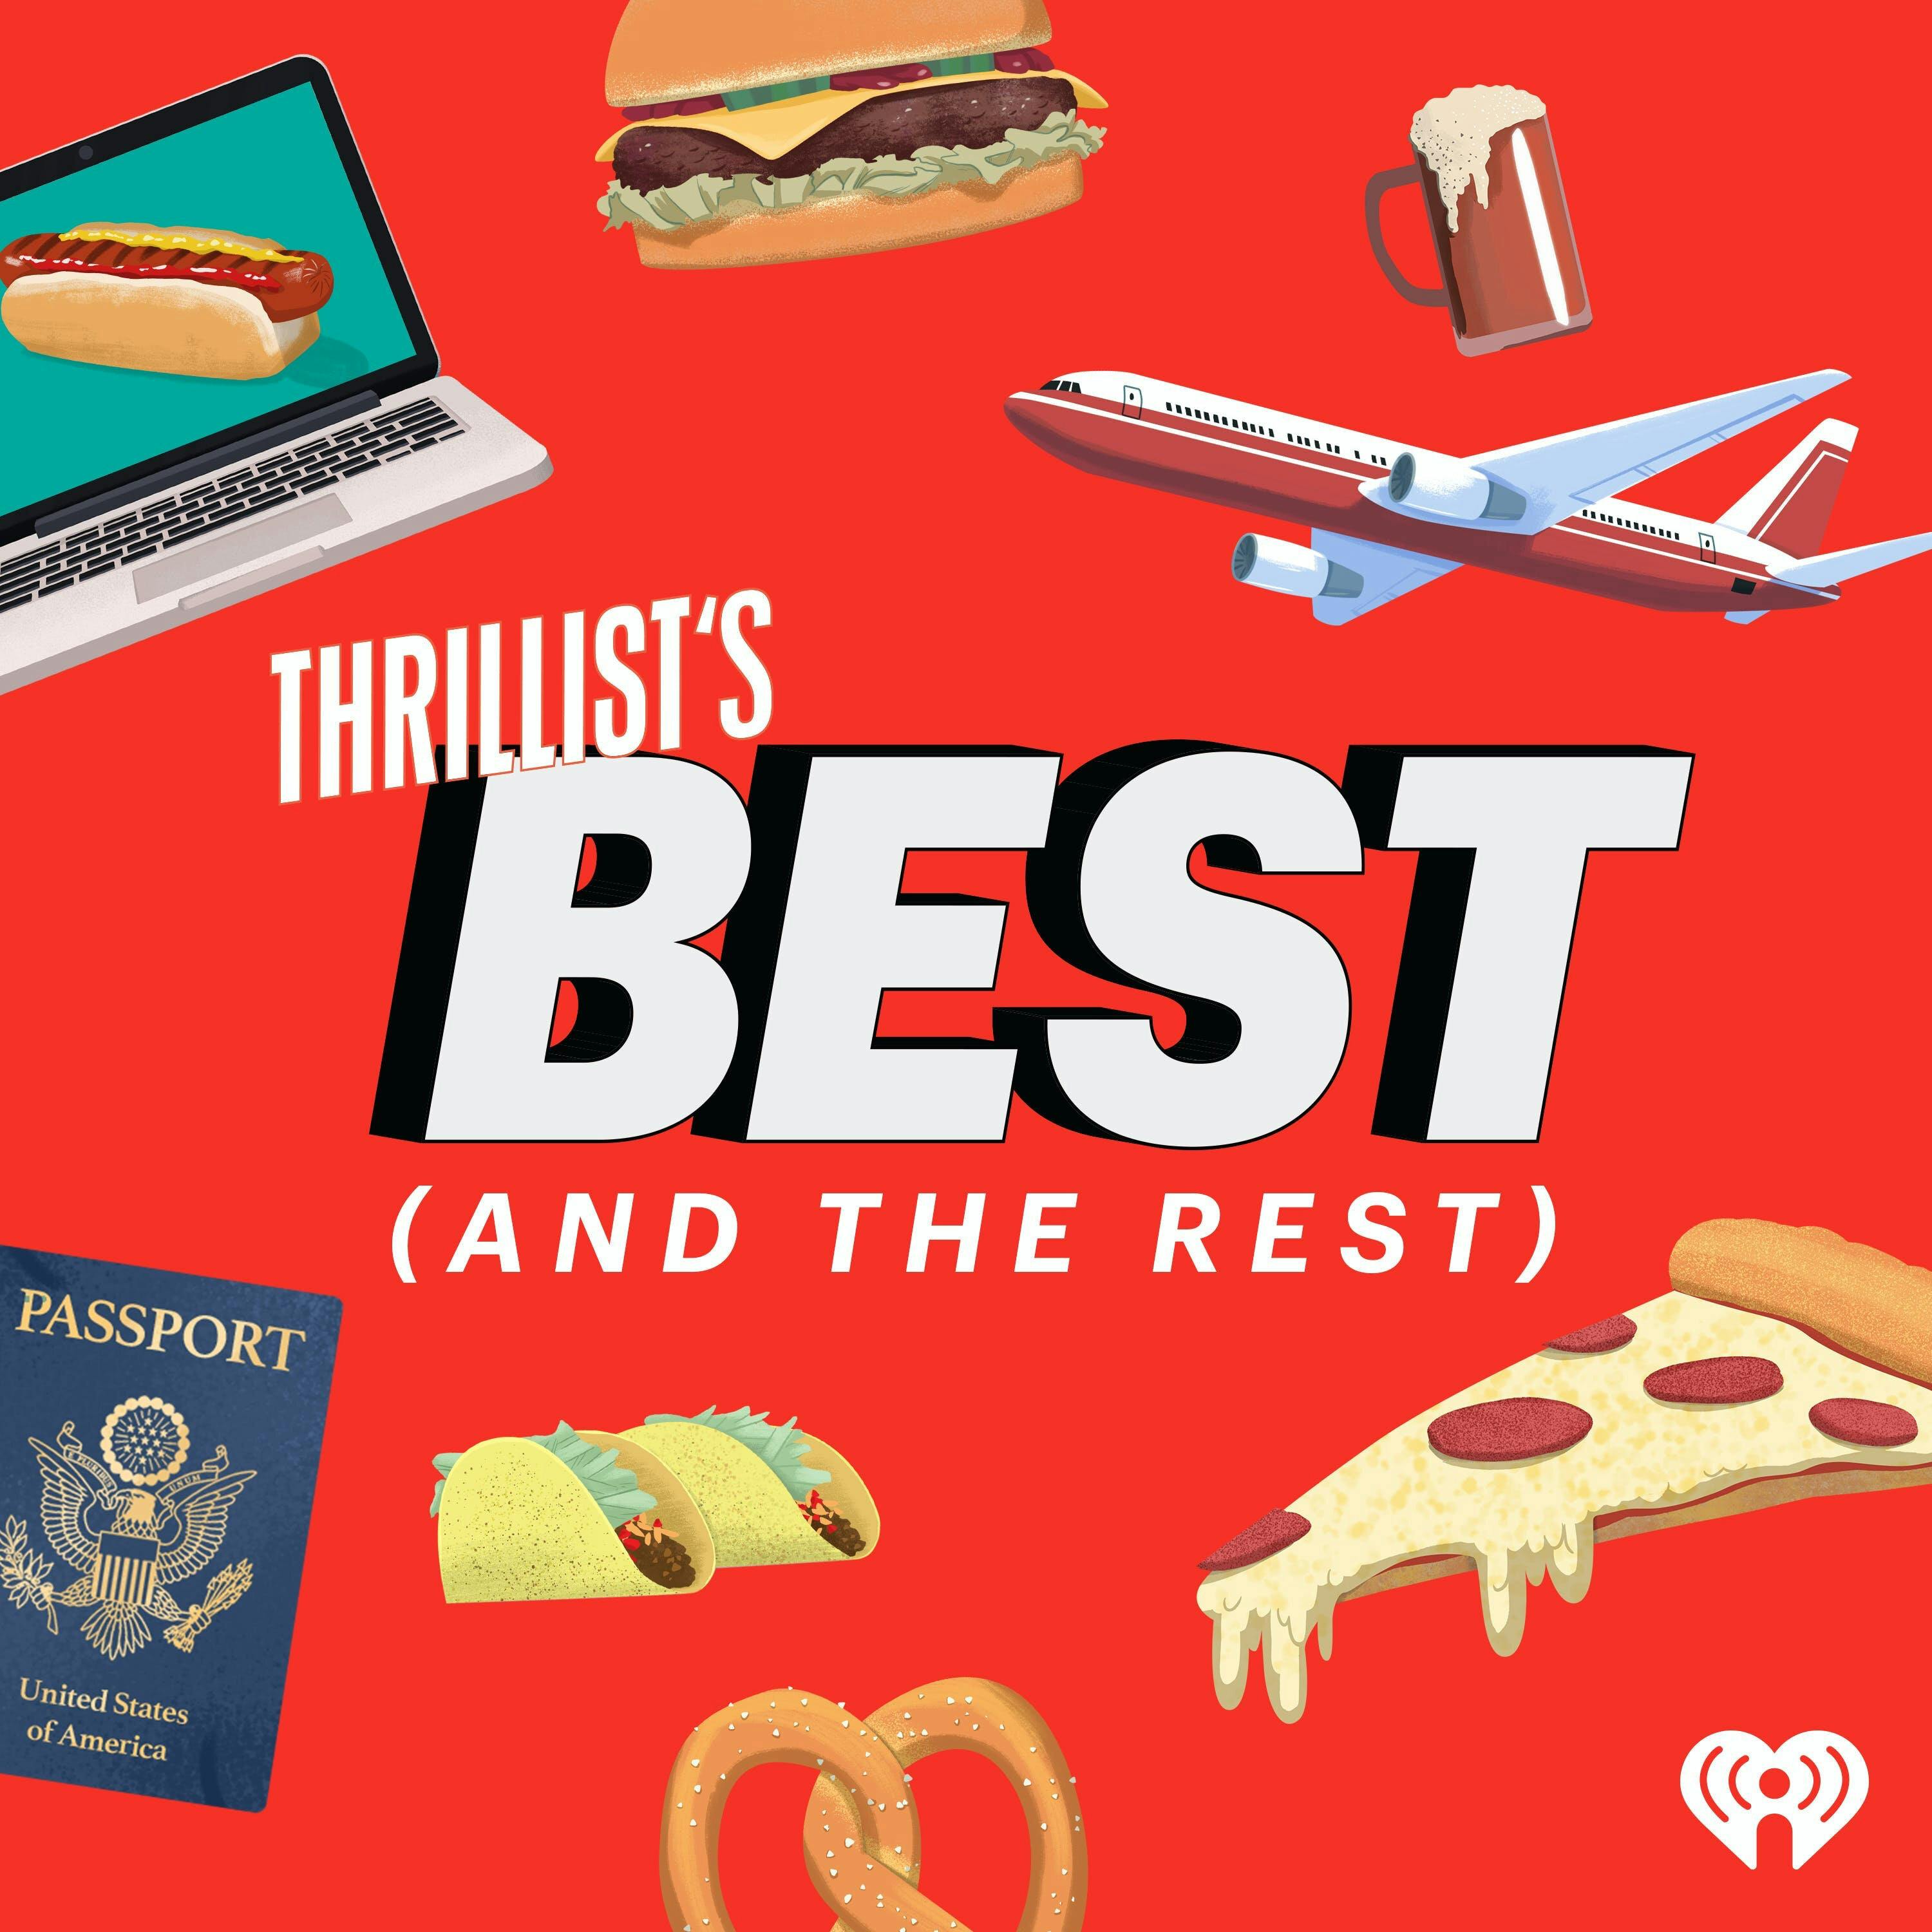 THRILLIST’S BEST: The Definitive Best Order at McDonald’s, In-n-Out, and More